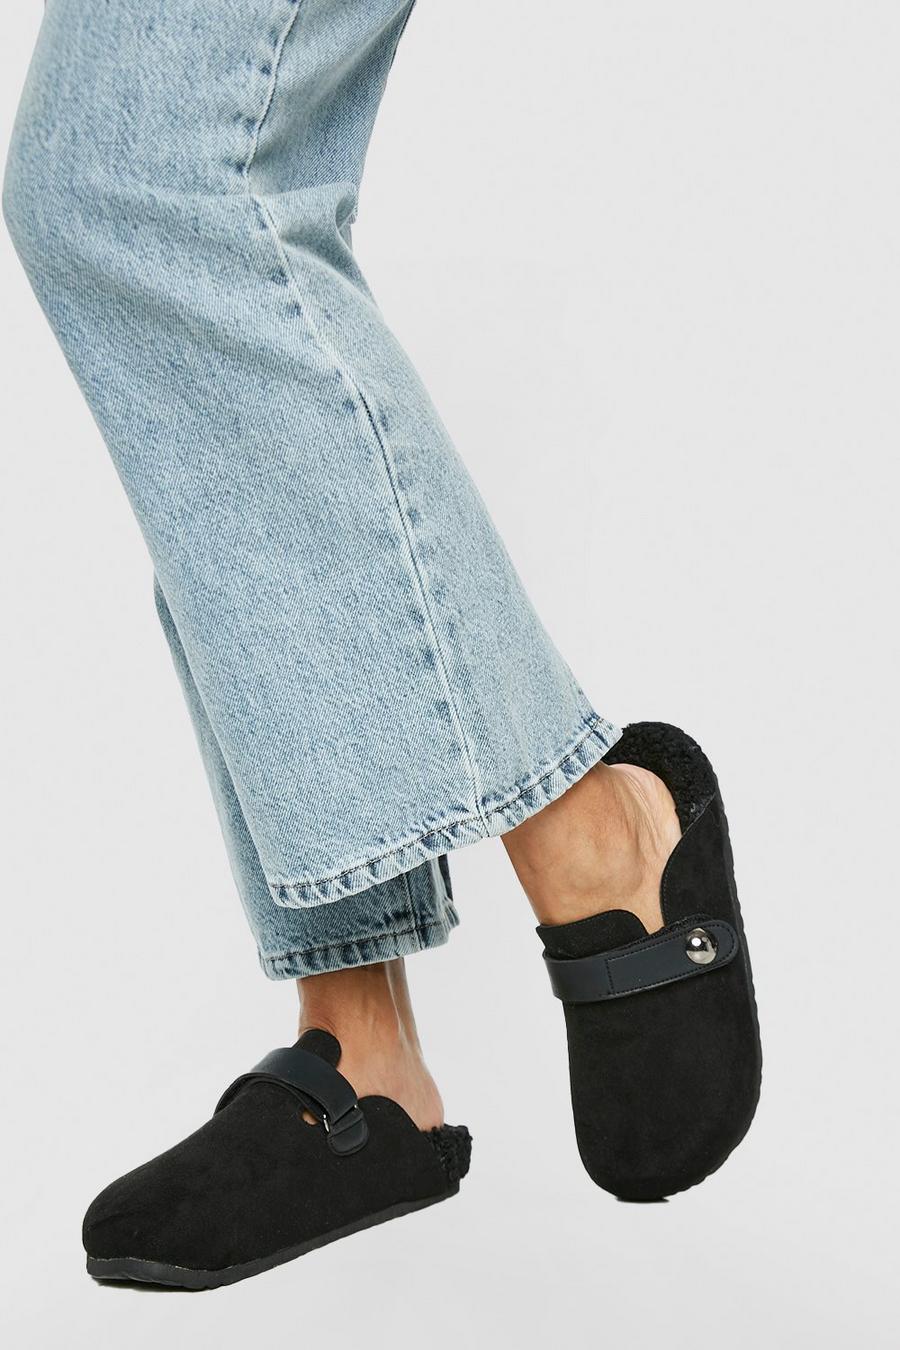 Black Get in on the sandal heel trend with these shoes